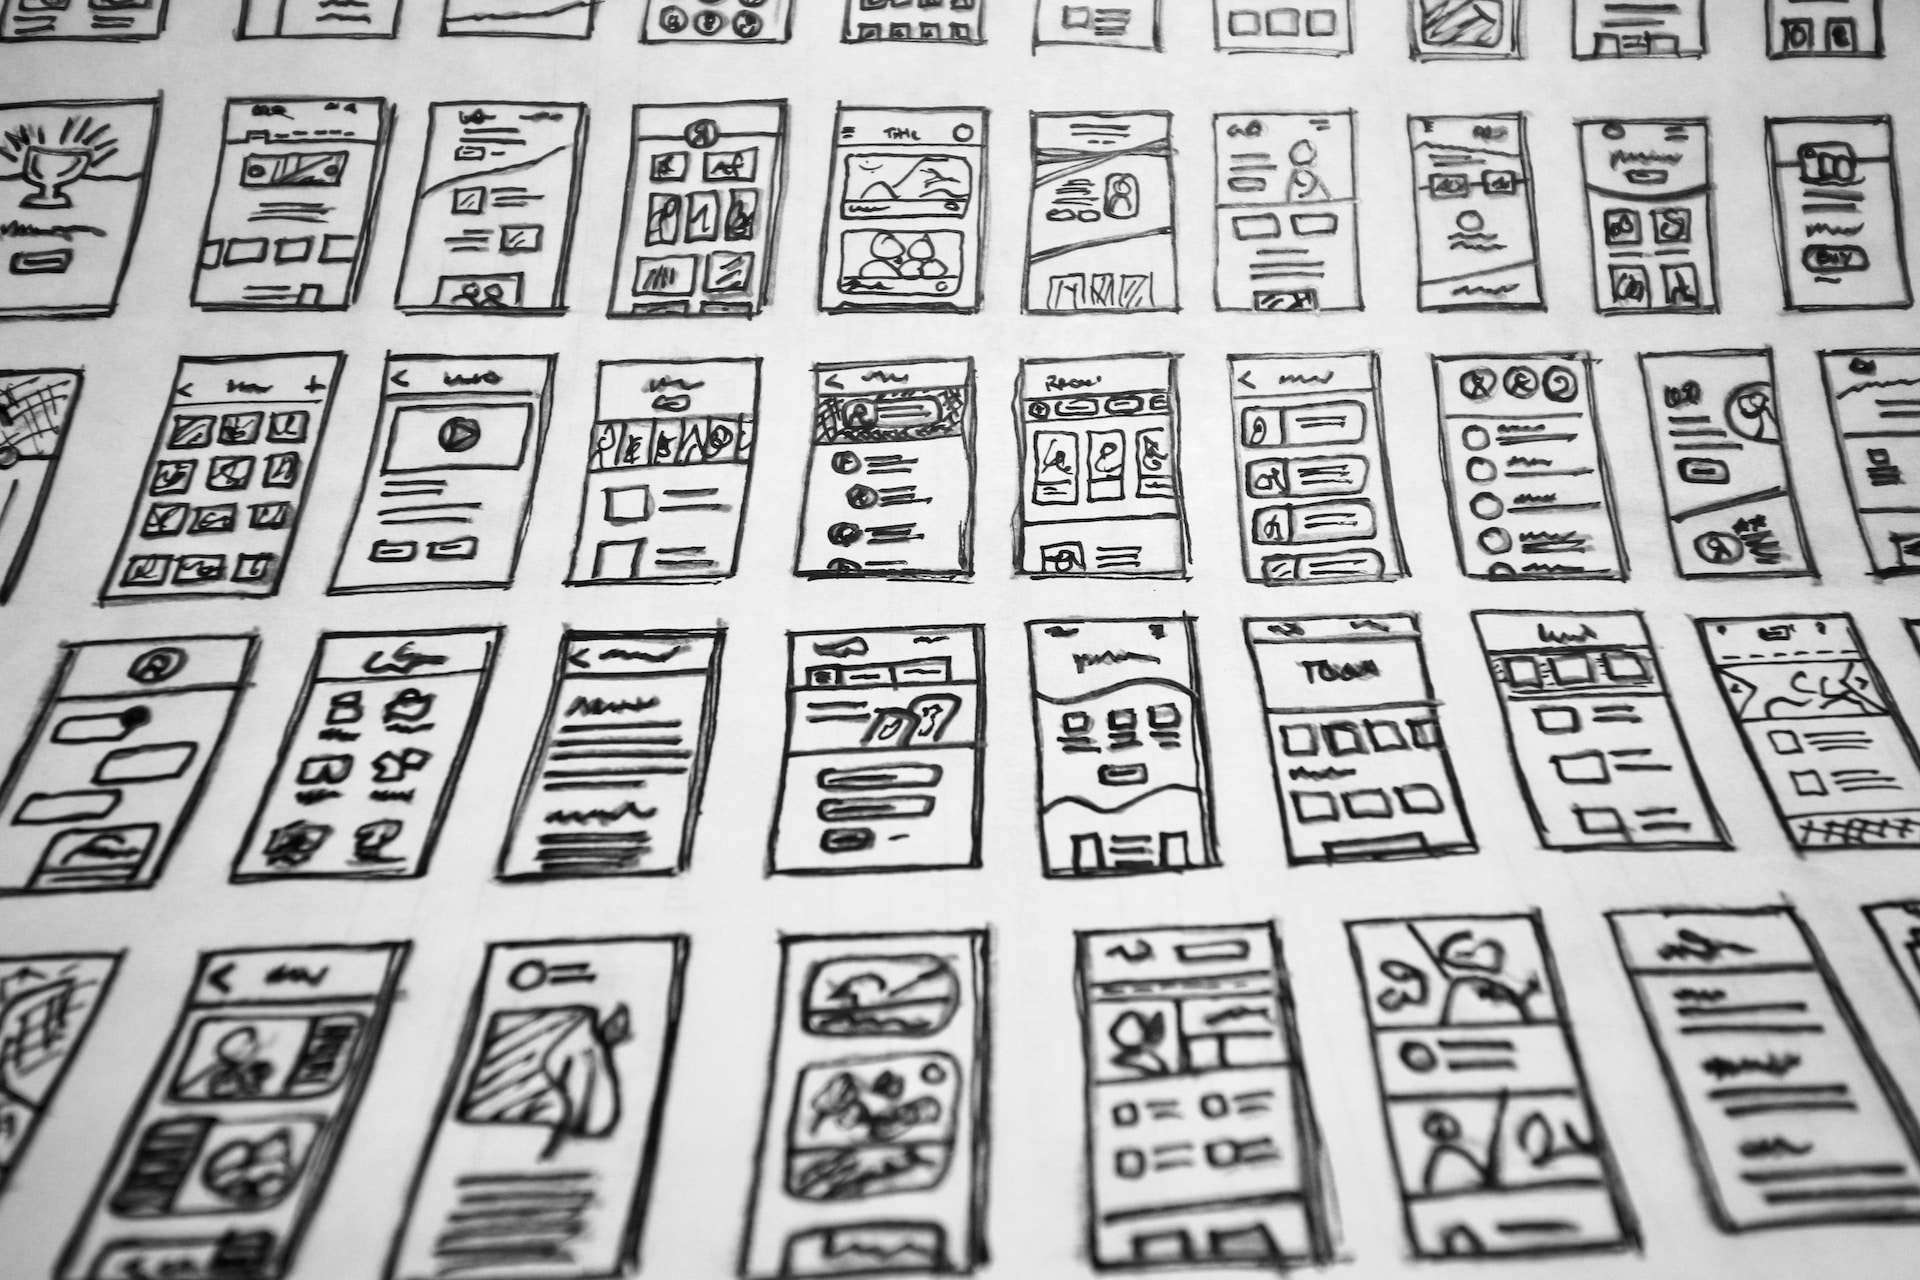 What are the skills and tools of a UX designer